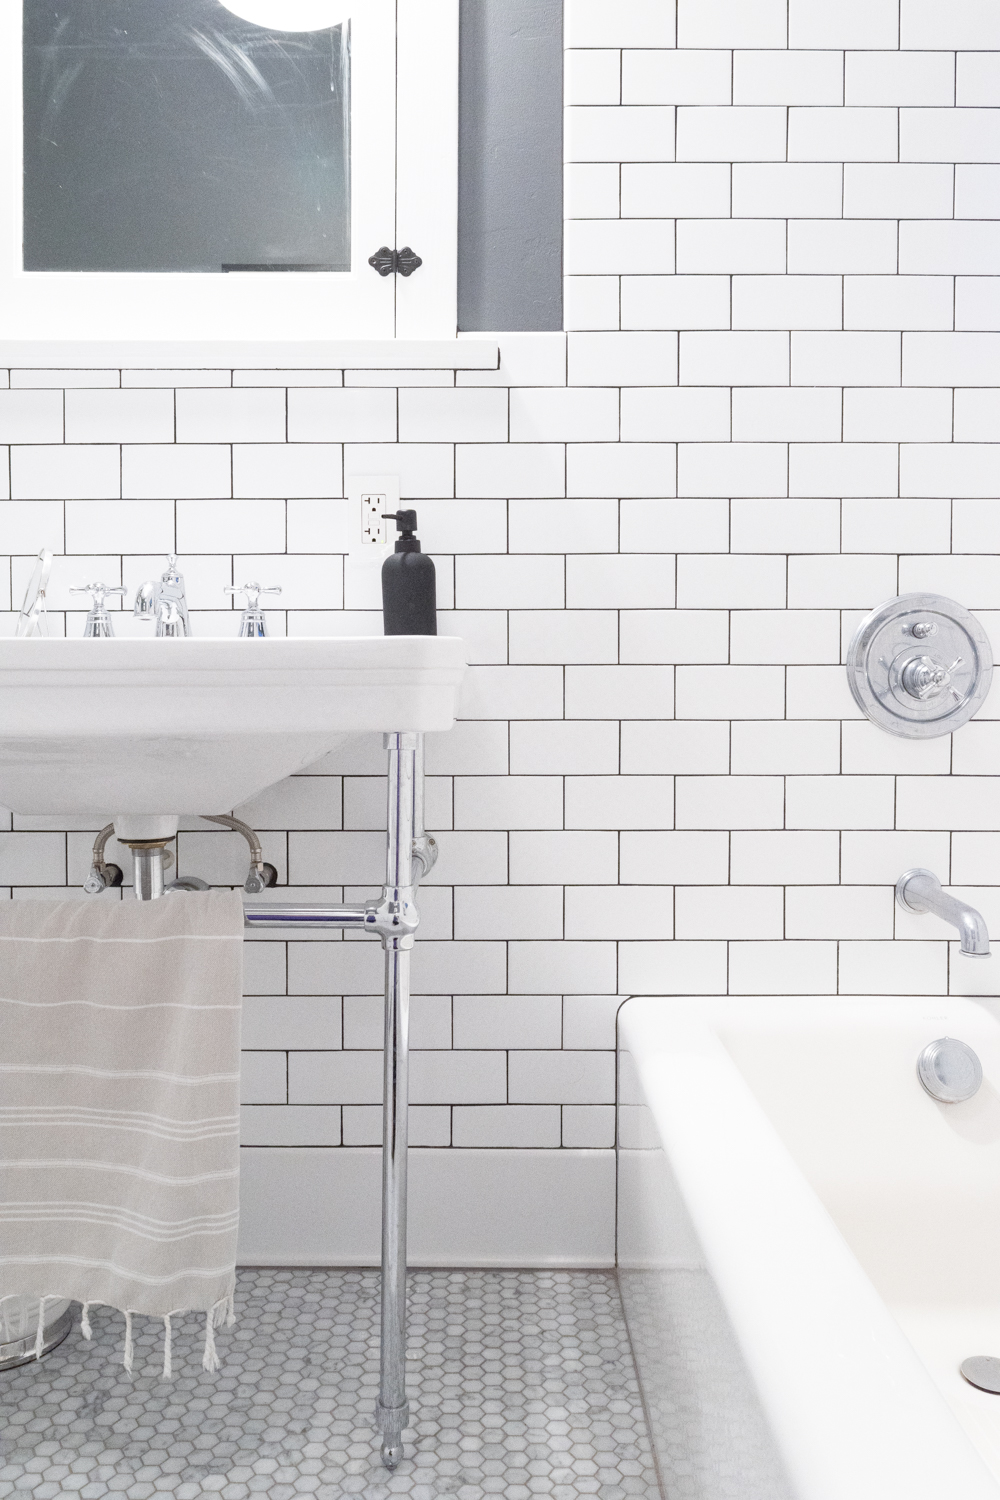 Classic Tile In The Bathroom, Bathrooms With Subway Tile